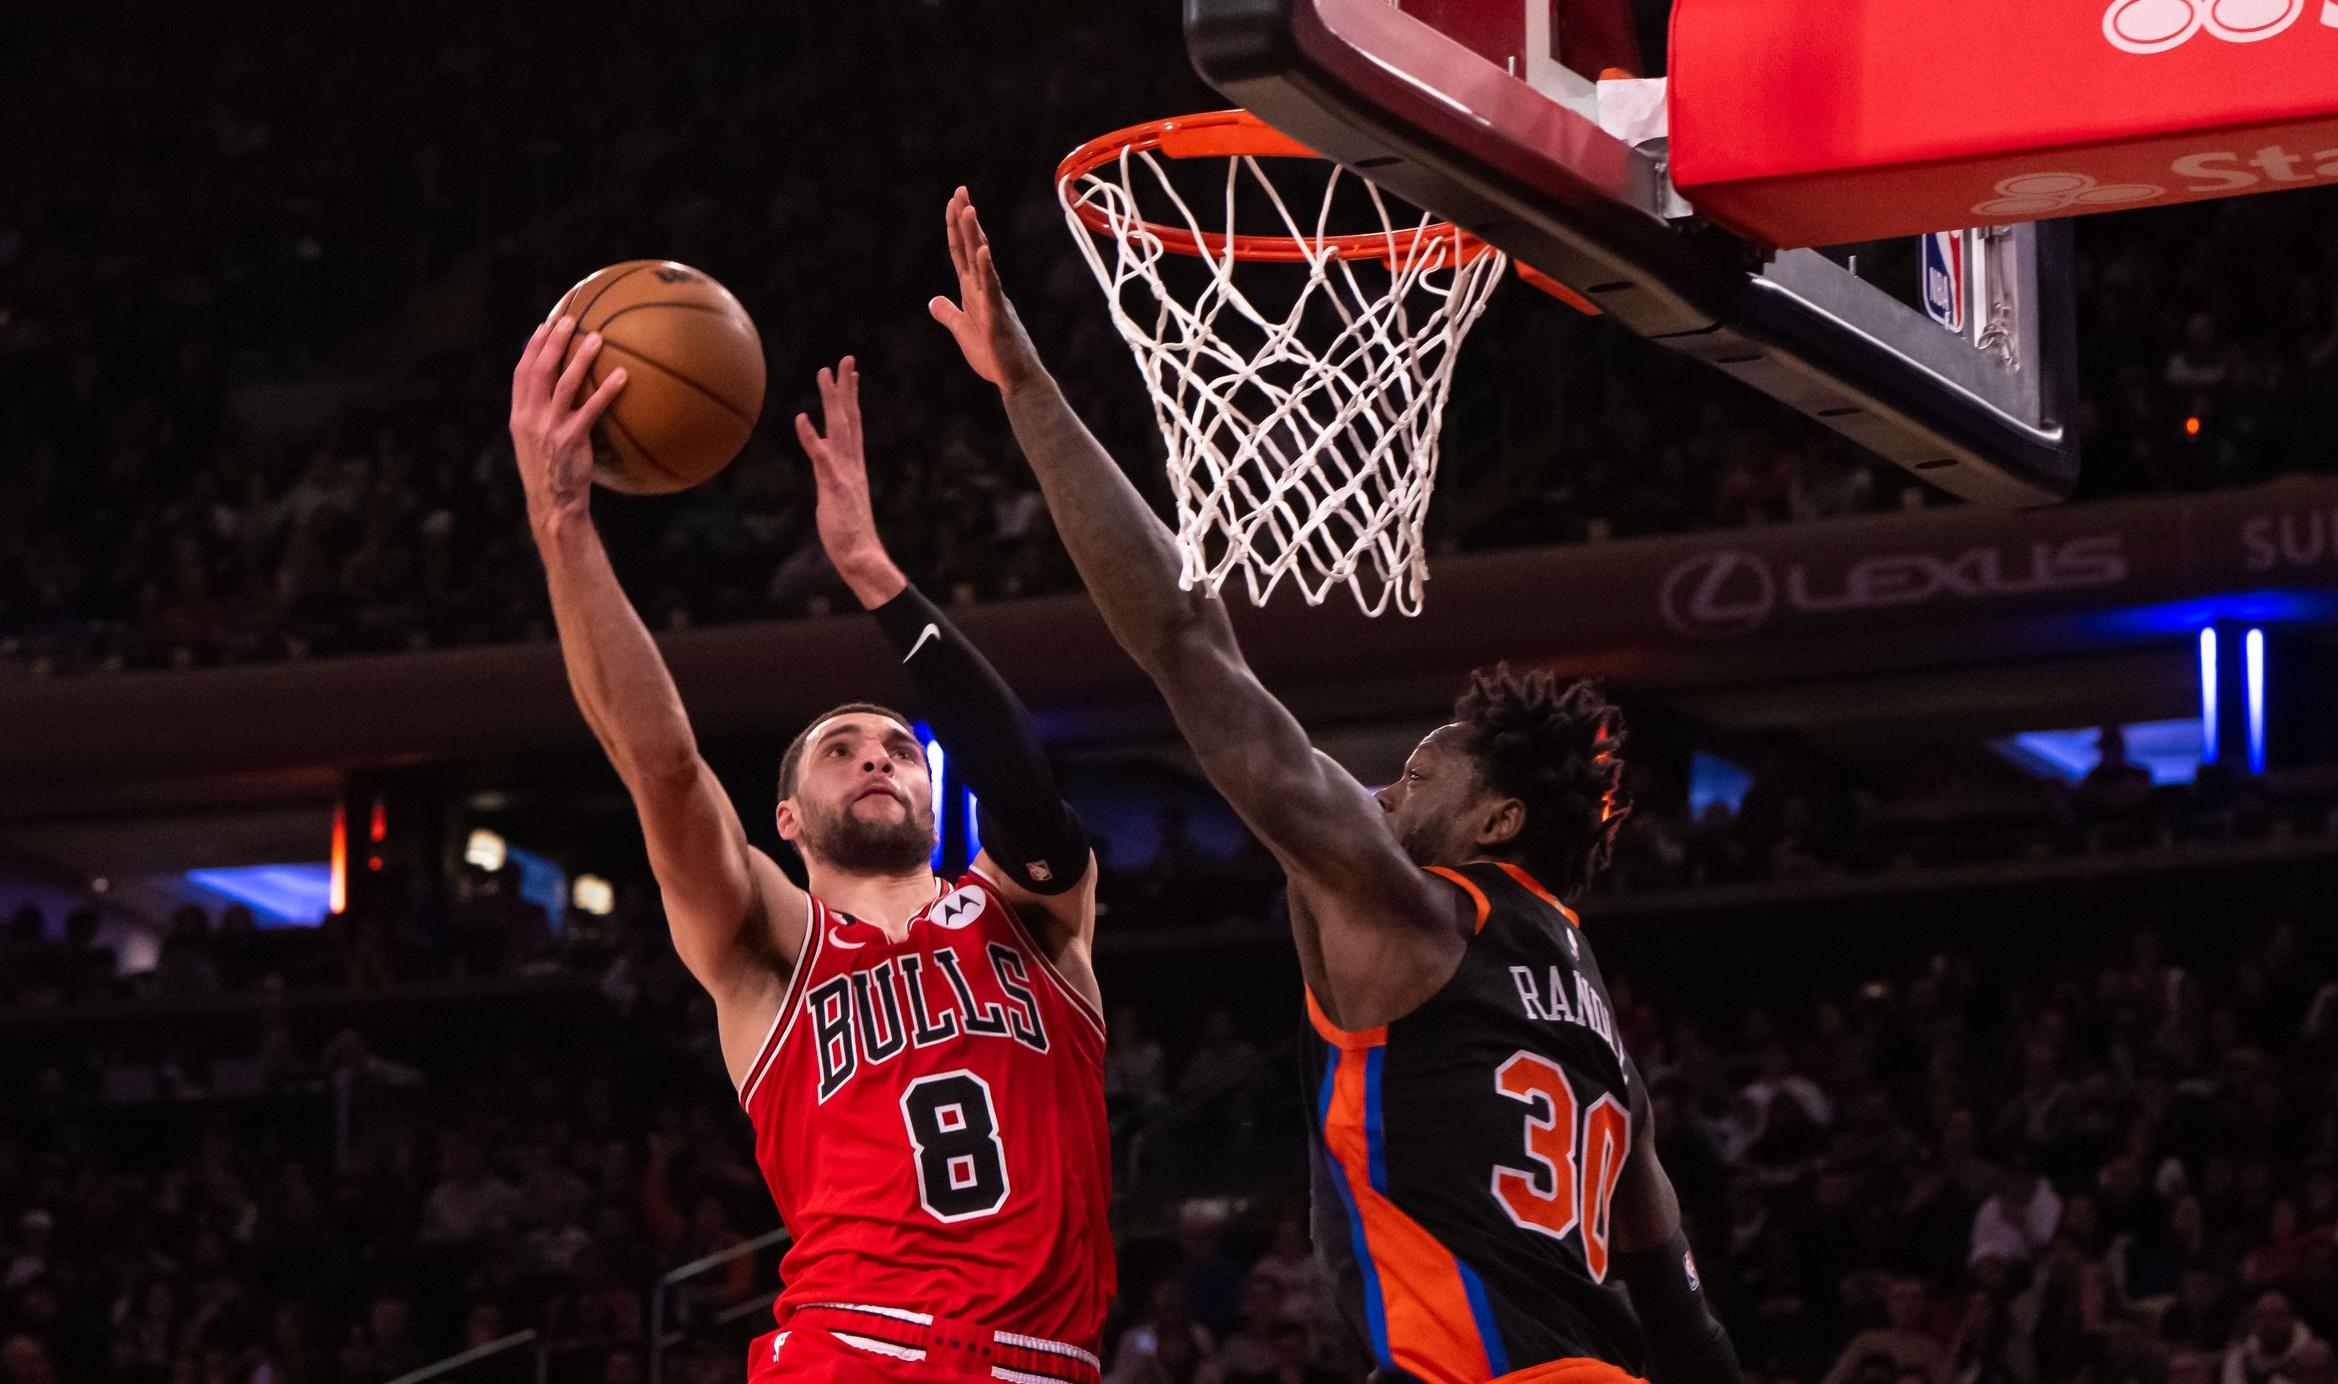 Chicago Bulls guard Zach LaVine (8) drives to the basket as New York Knicks forward Julius Randle (30) defends during the fourth quarter at Madison Square Garden. / John Jones-USA TODAY Sports